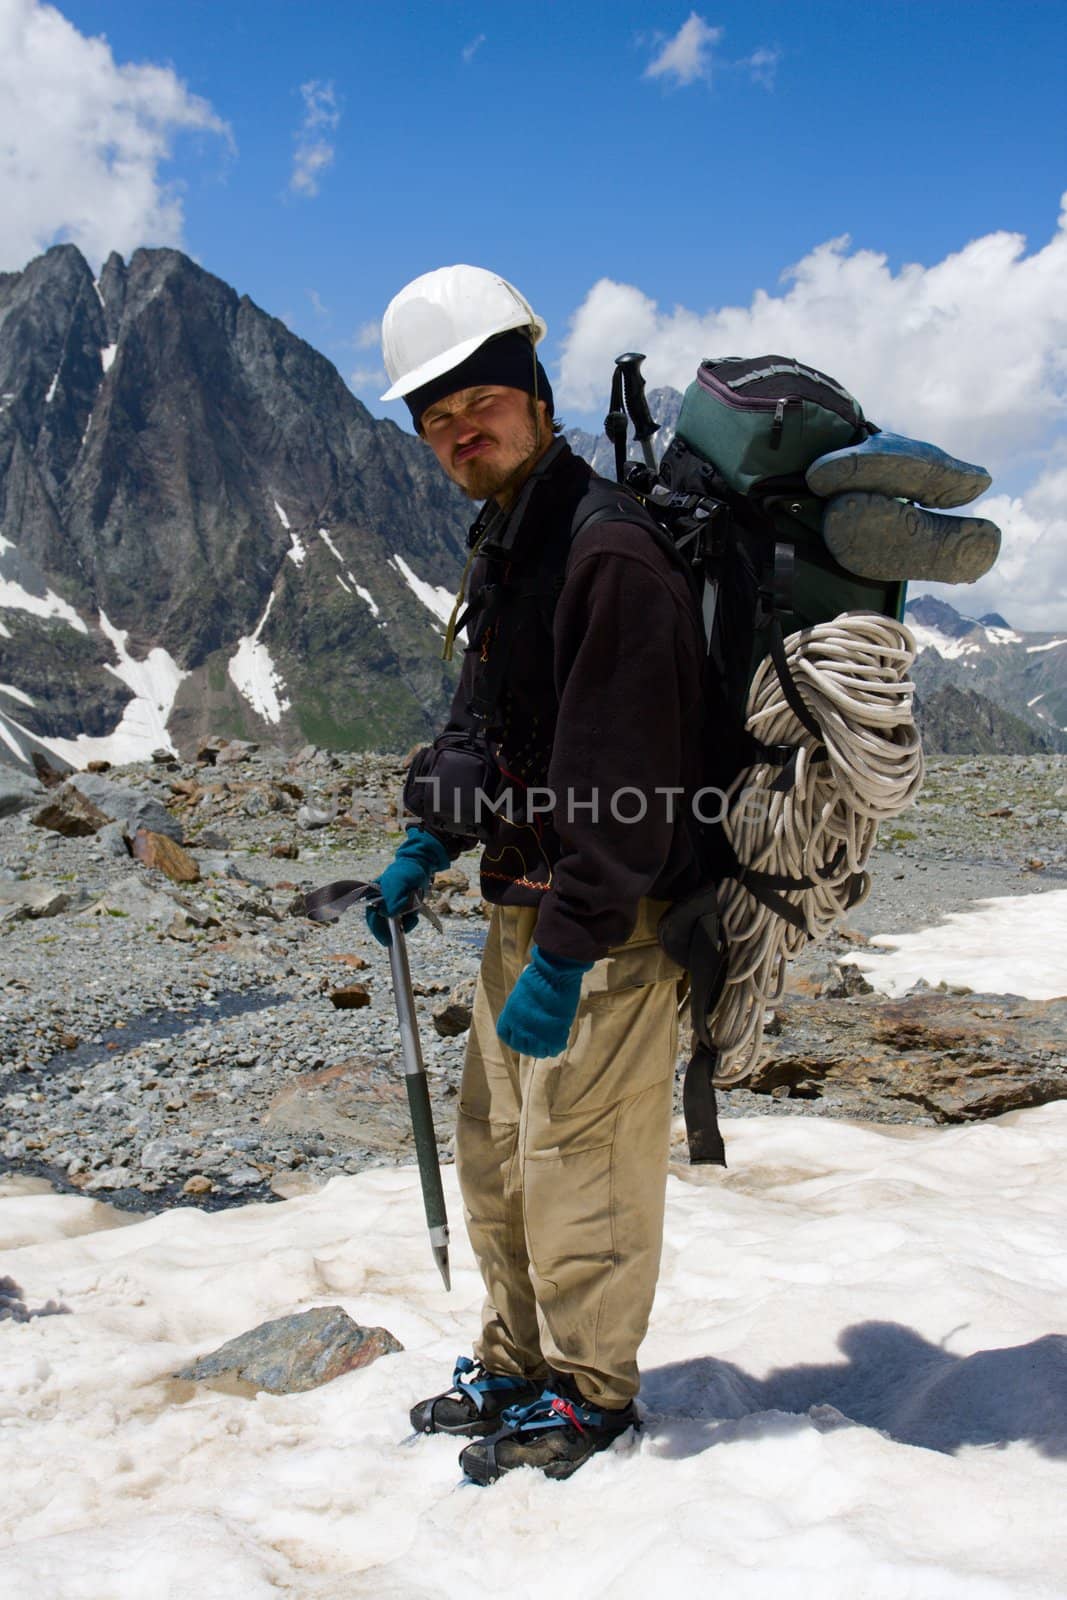 Climber in crampon and helmet standing on snow in mountains